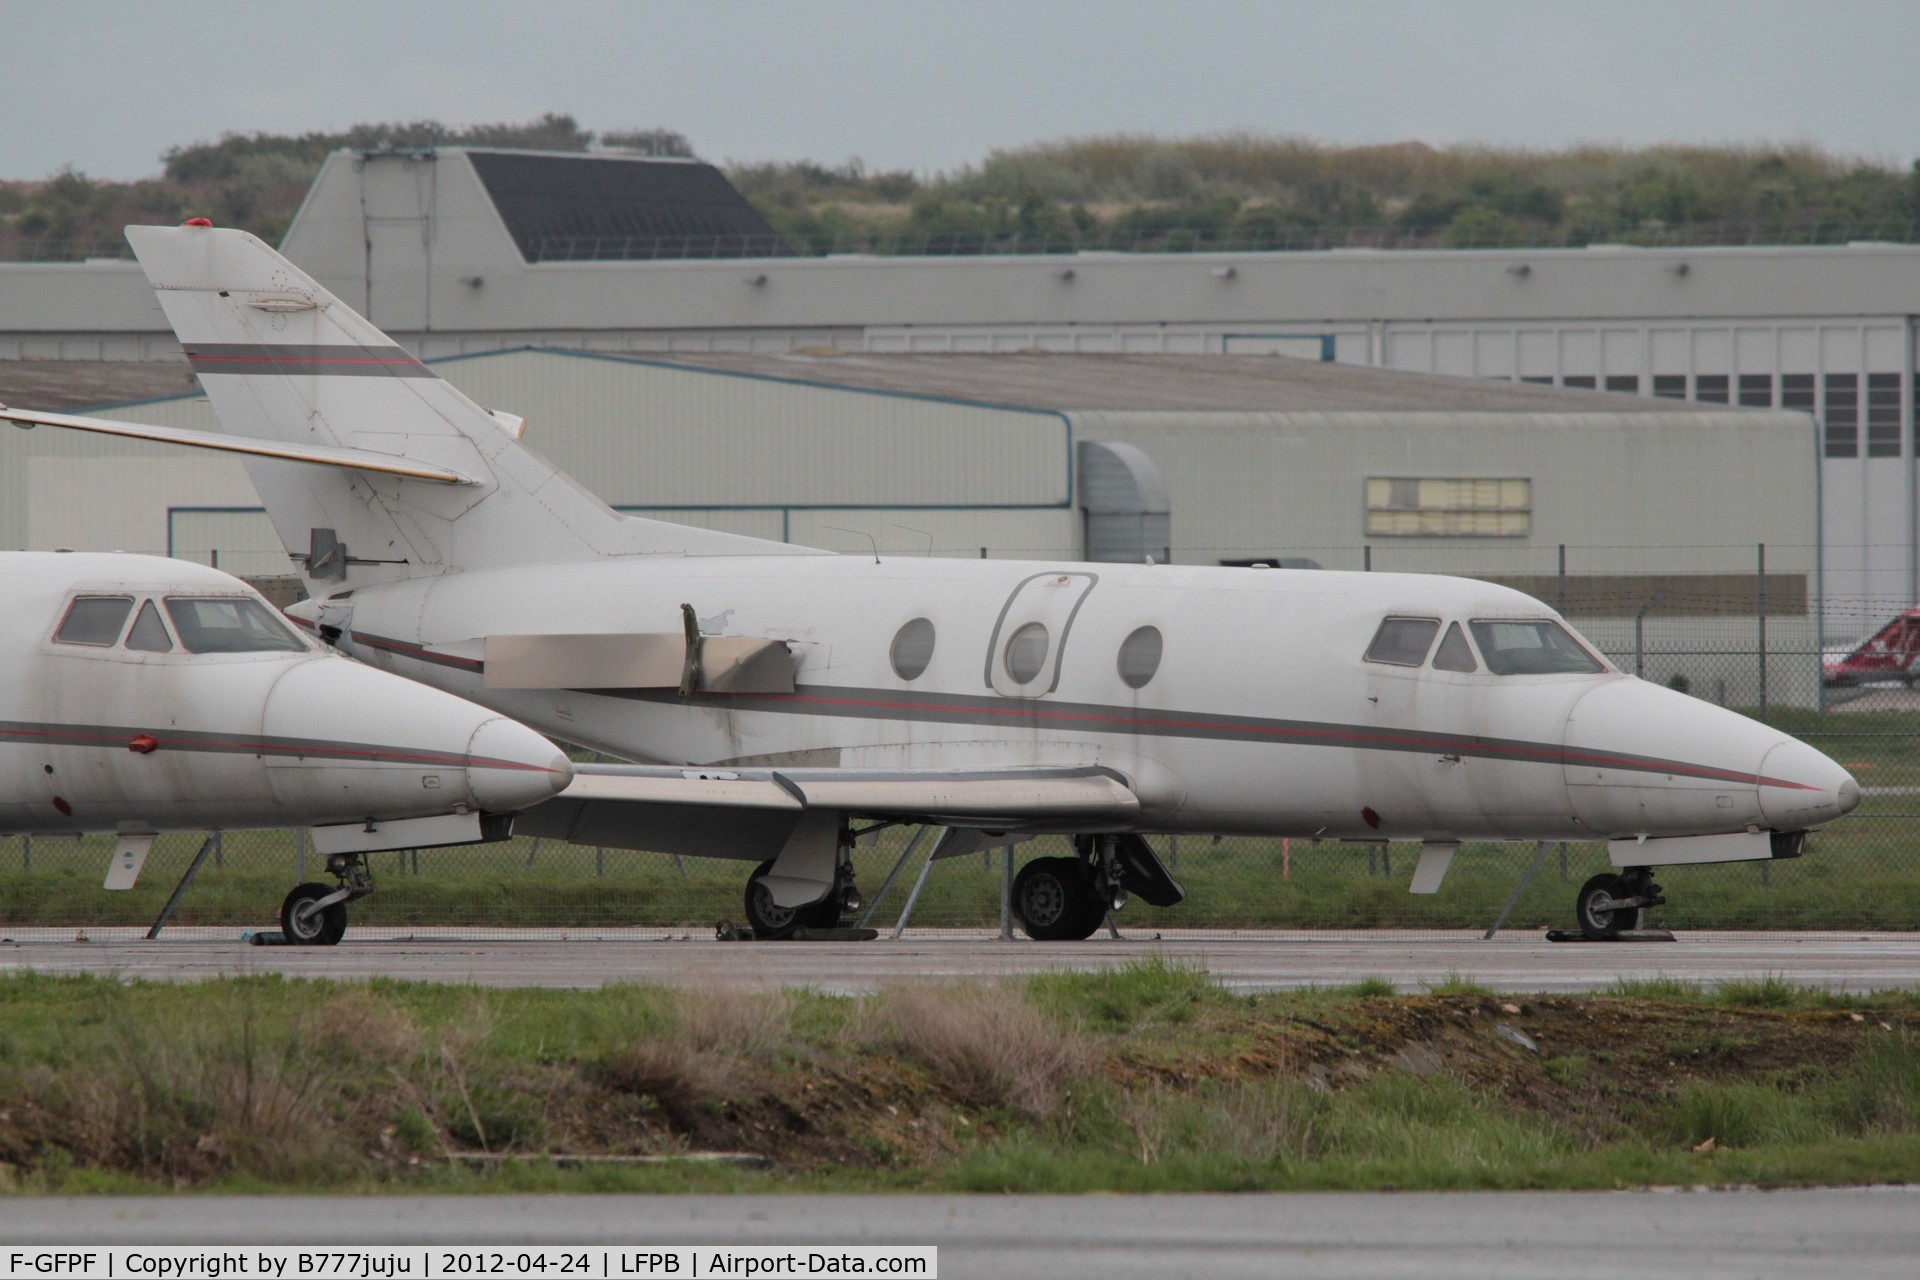 F-GFPF, 1976 Dassault Falcon 10 C/N 68, store at Le Bourget